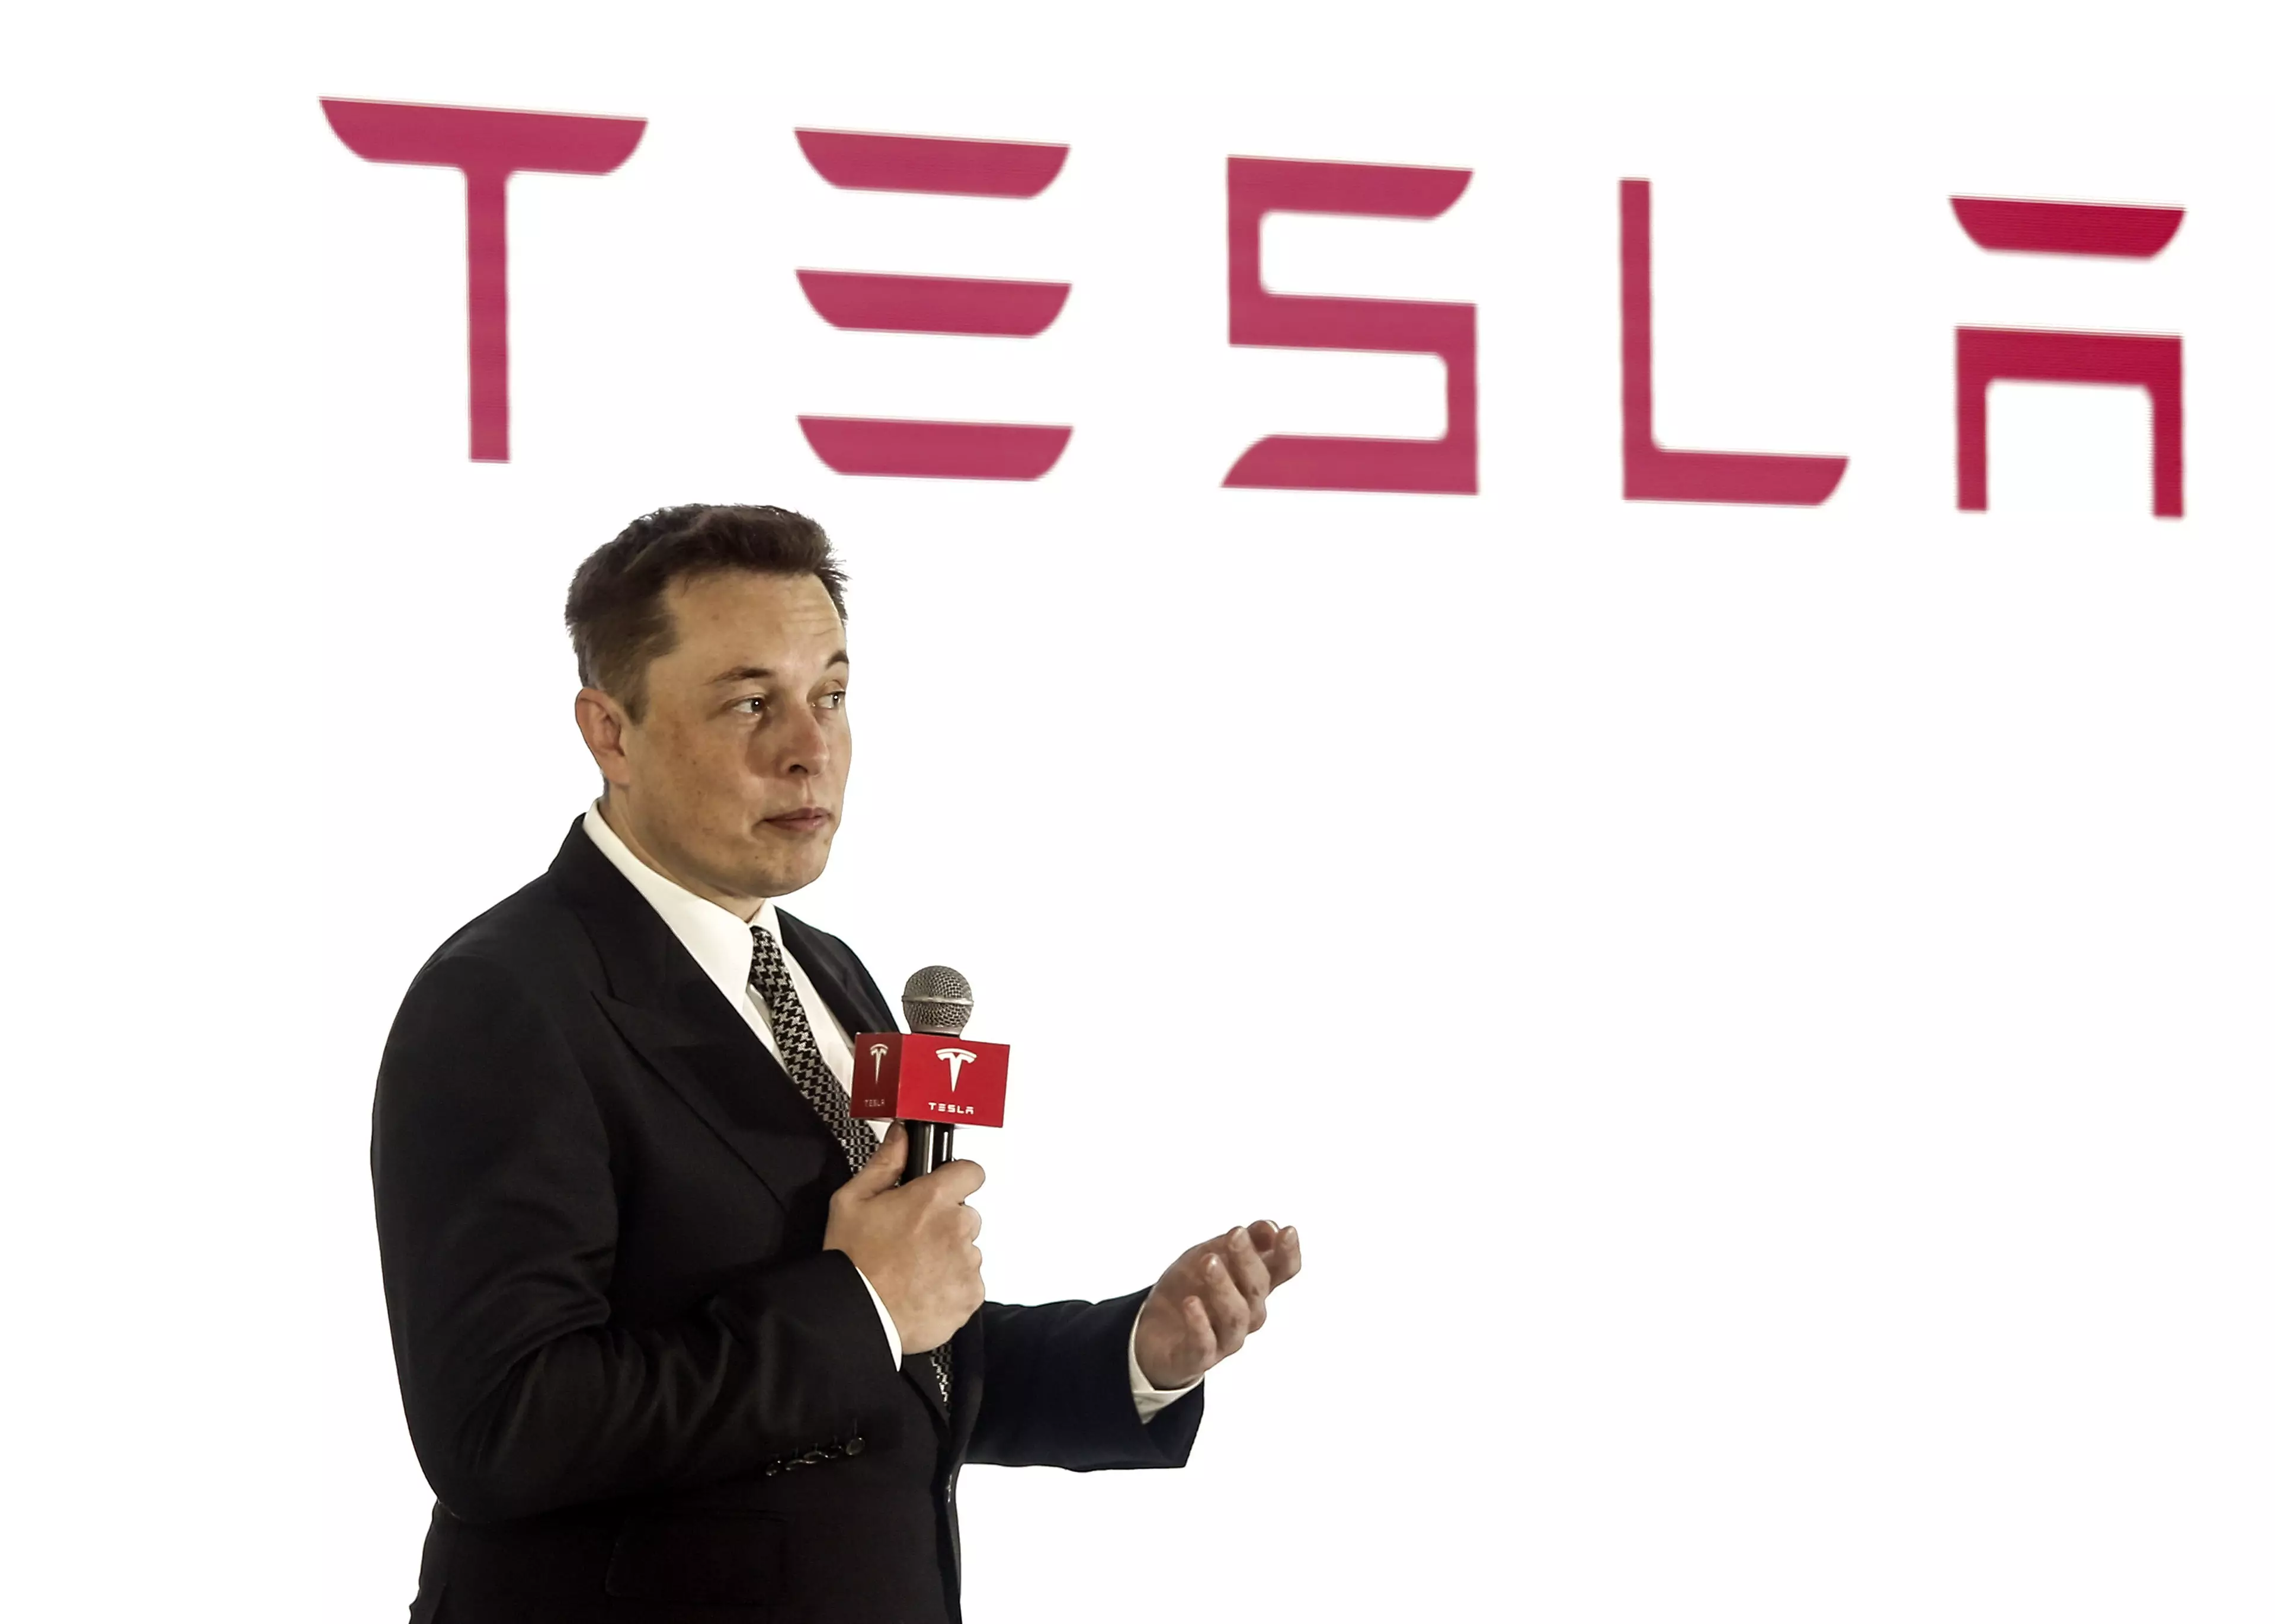 It's Tesla Founder Elon Musk's Birthday, But Let's Talk About His Net Worth